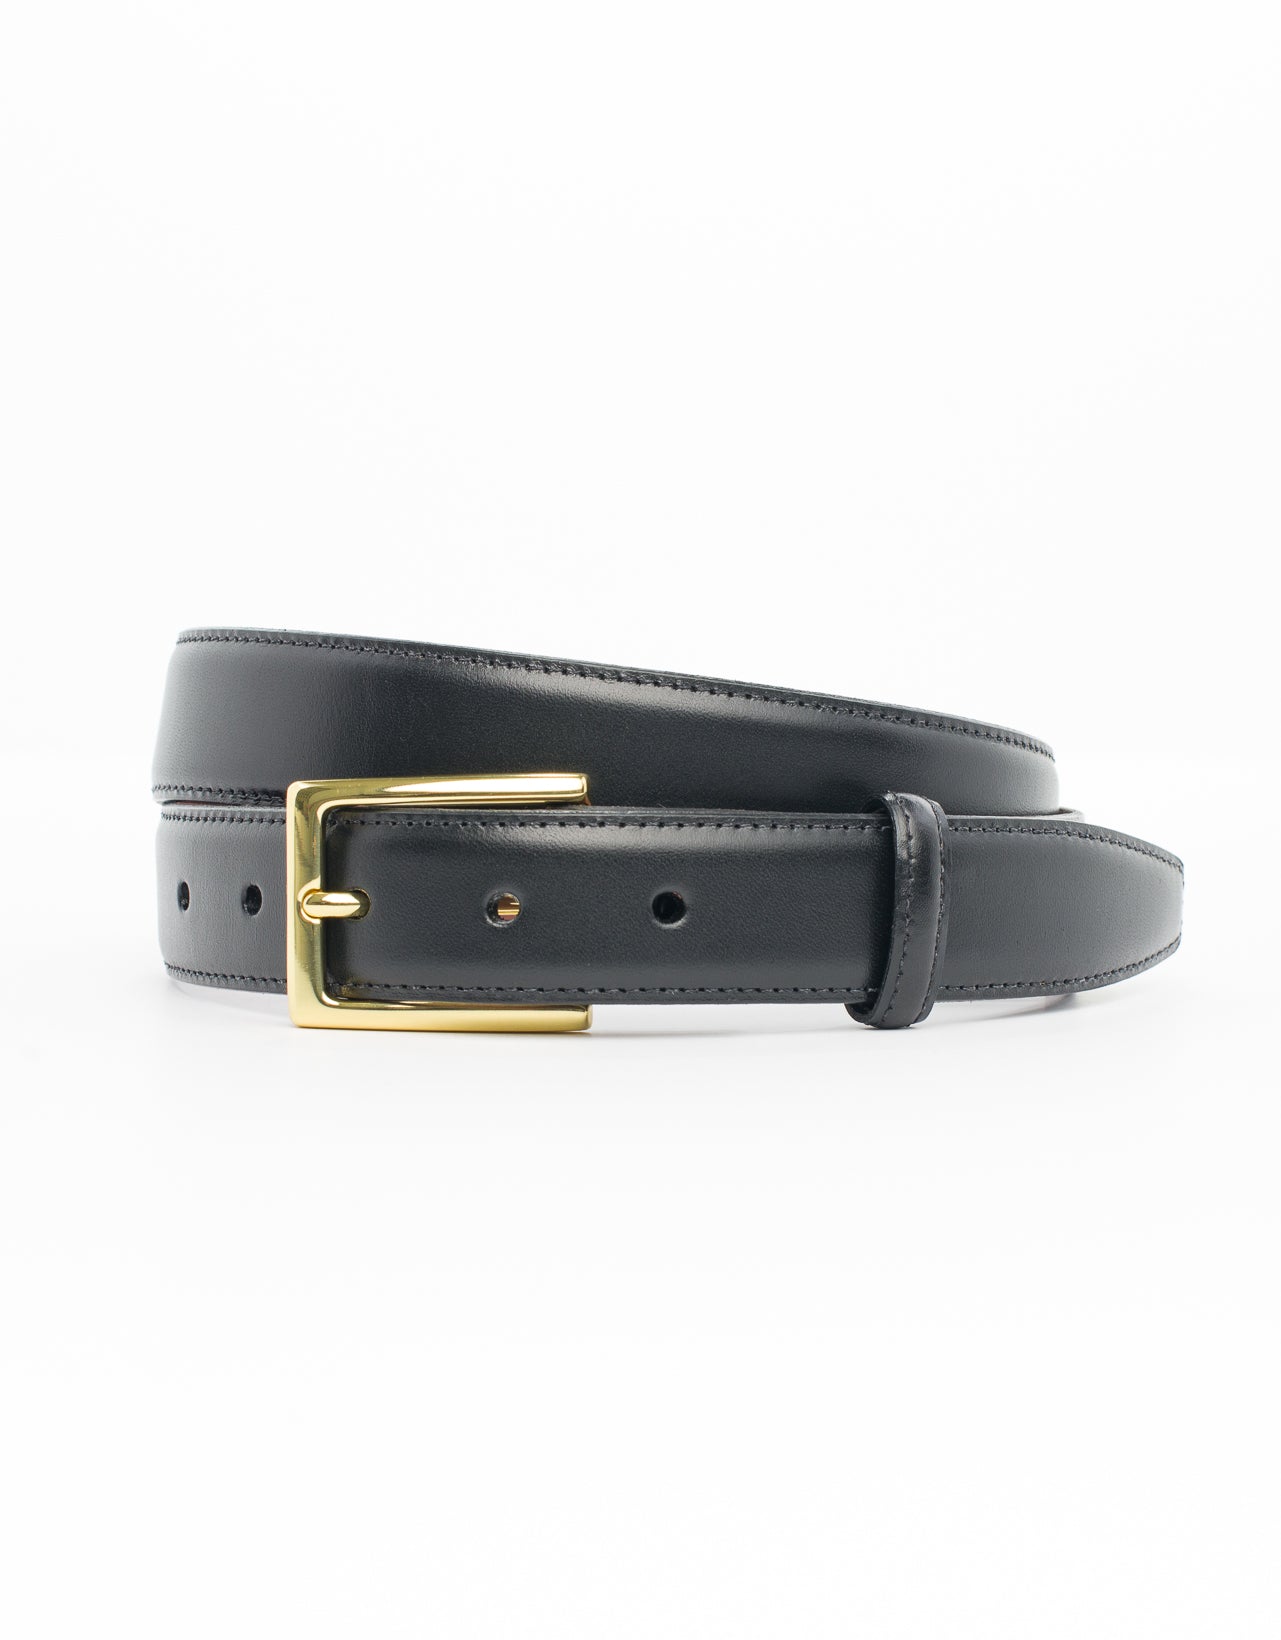 BLACK WITH GOLD ITALIAN LEATHER BELT